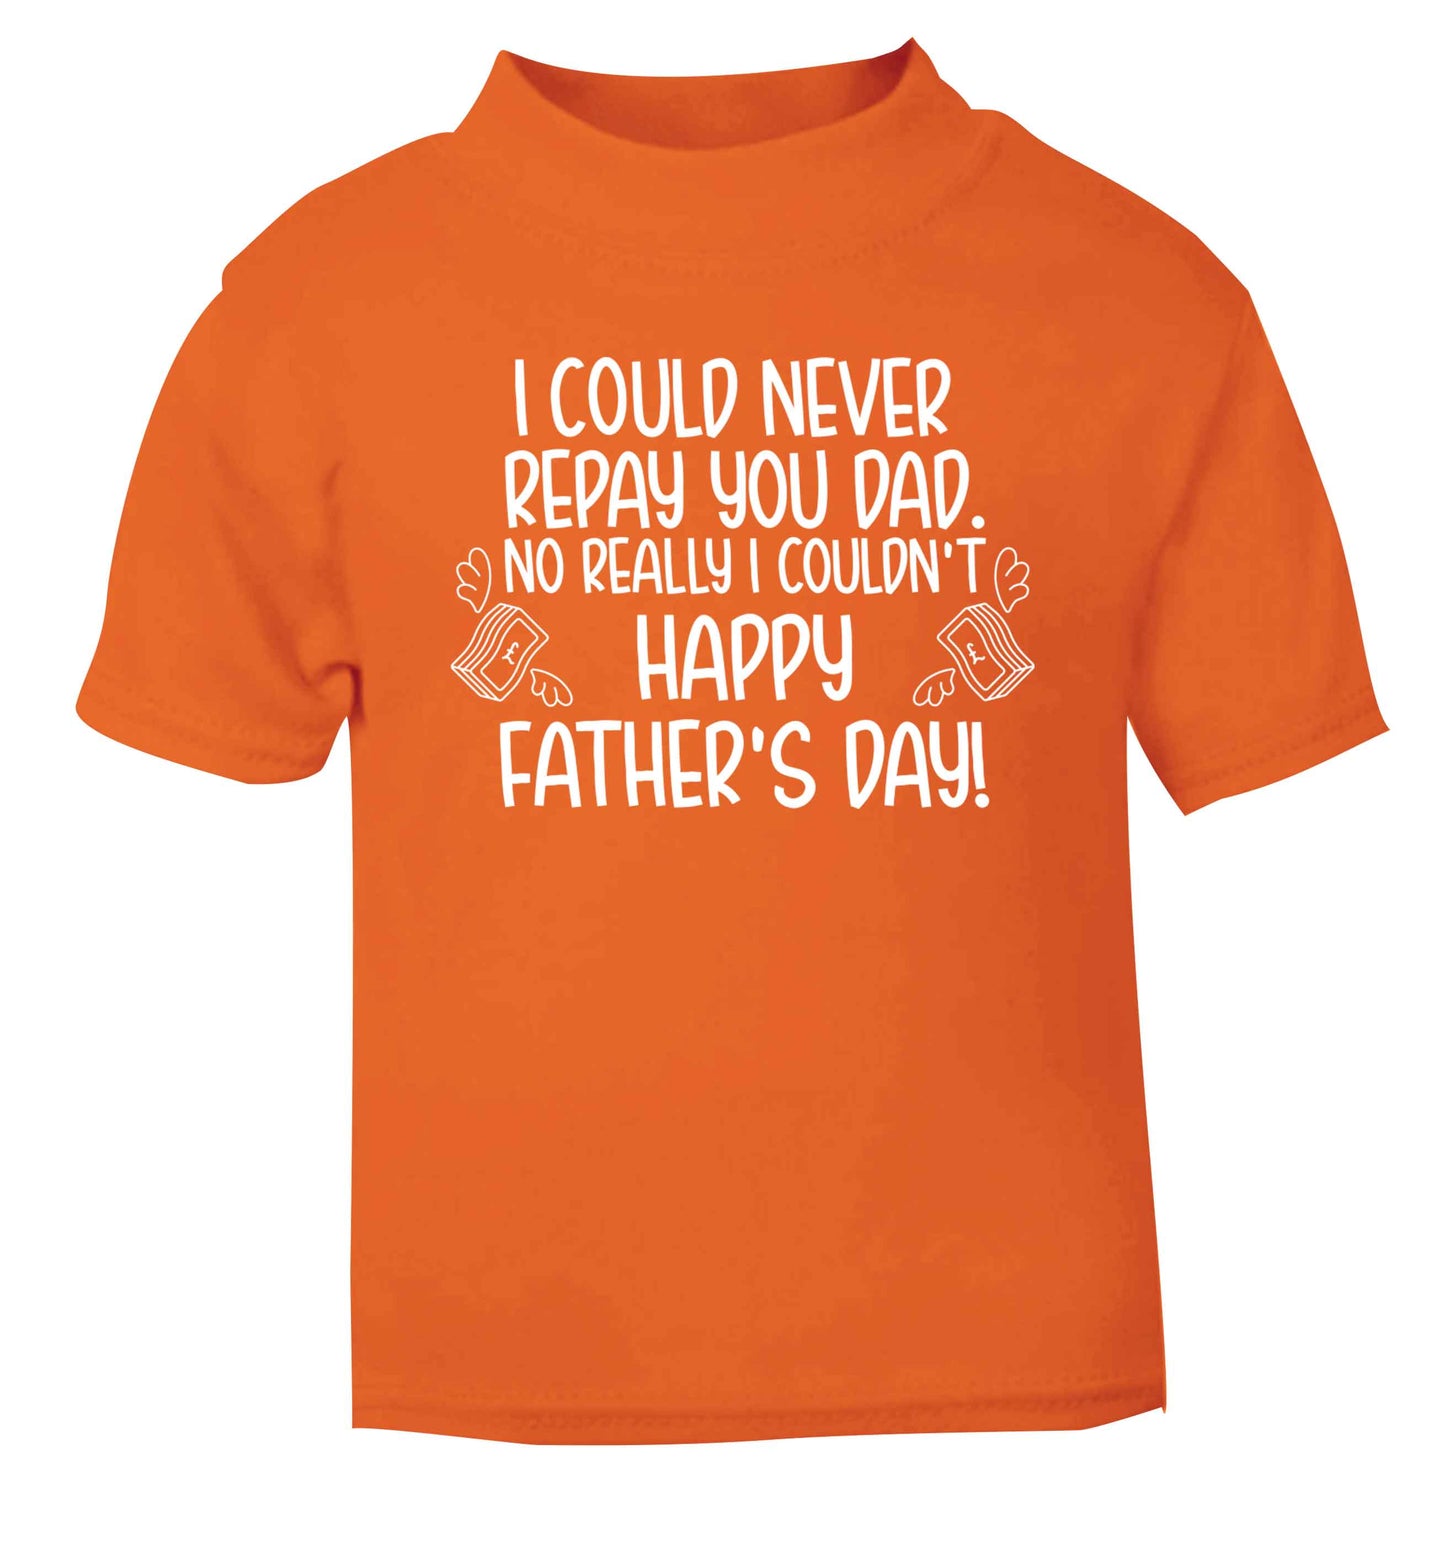 I could never repay you dad. No I really couldn't happy Father's day! orange baby toddler Tshirt 2 Years